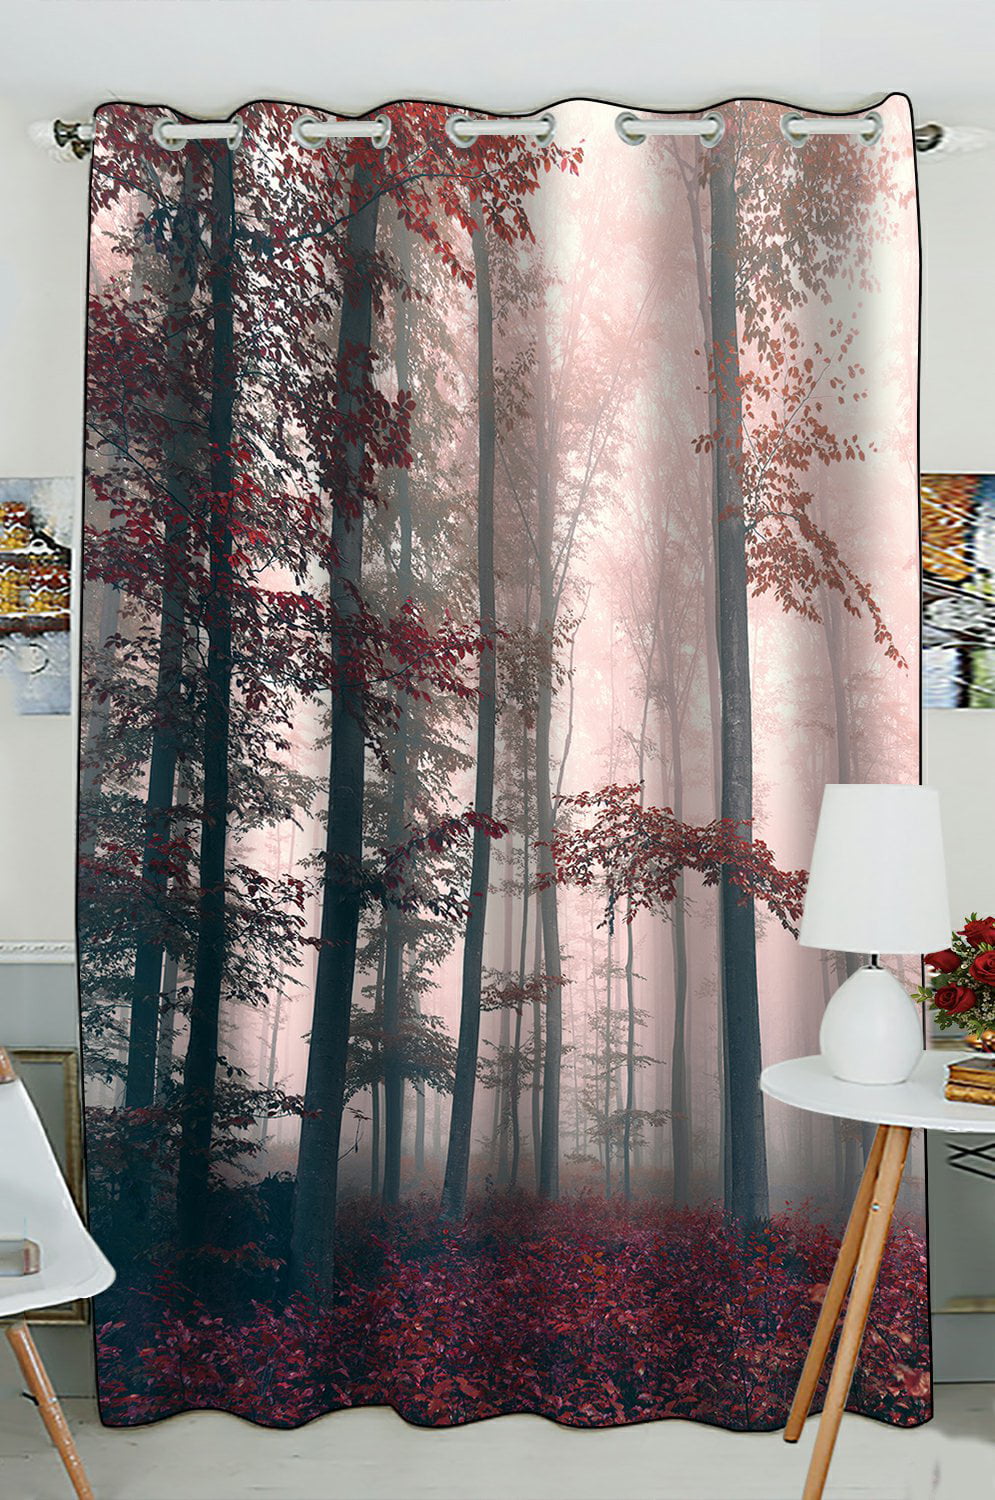 PHFZK Nature Scenery Window Curtain, Beautiful Red Colored Foggy Mystic ...